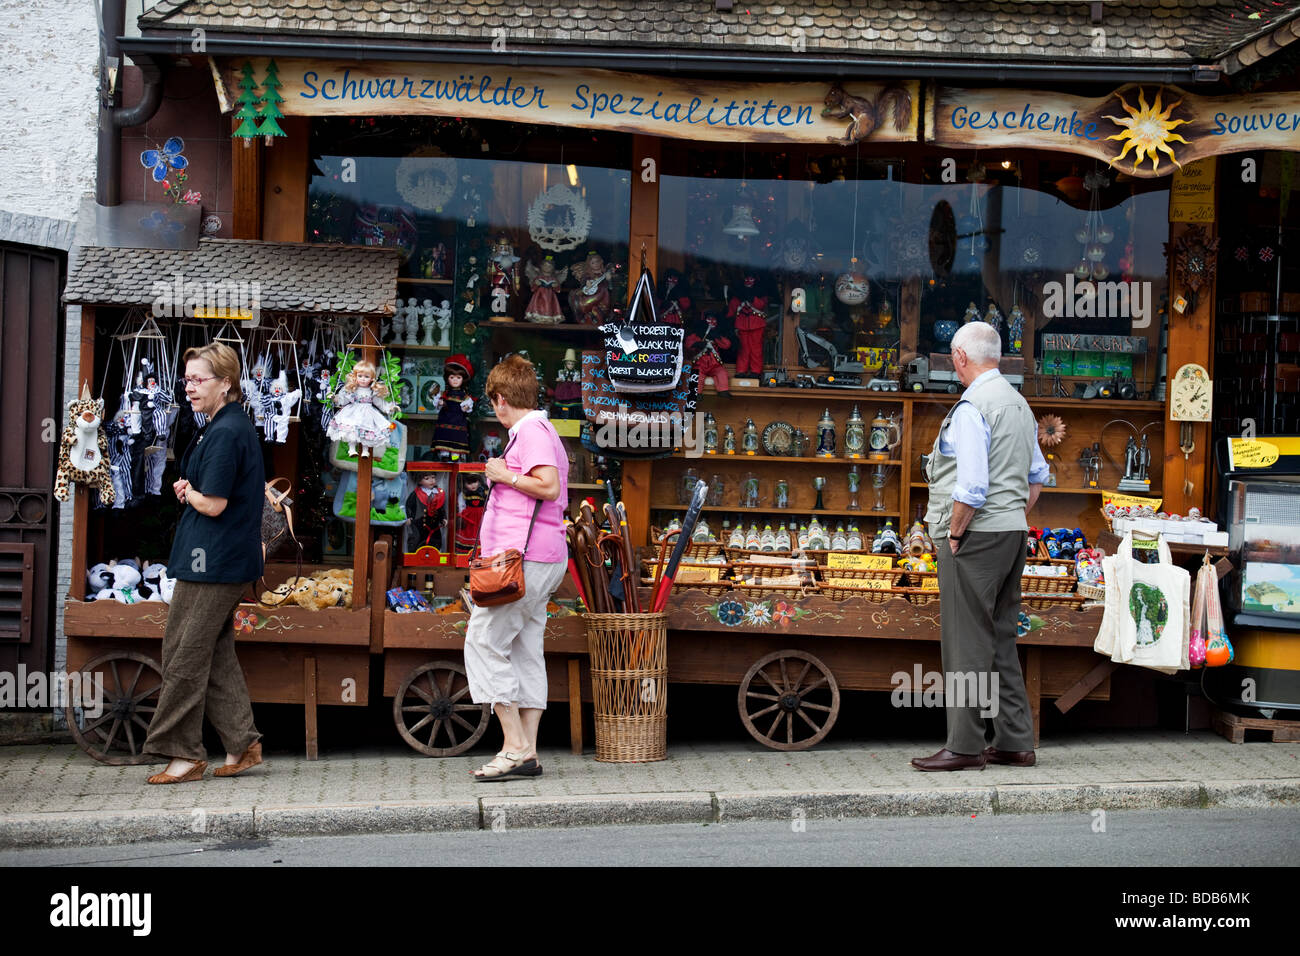 Tourists in front of souvenirs shop in Triberg, Schwarzwald, Germany. Stock Photo